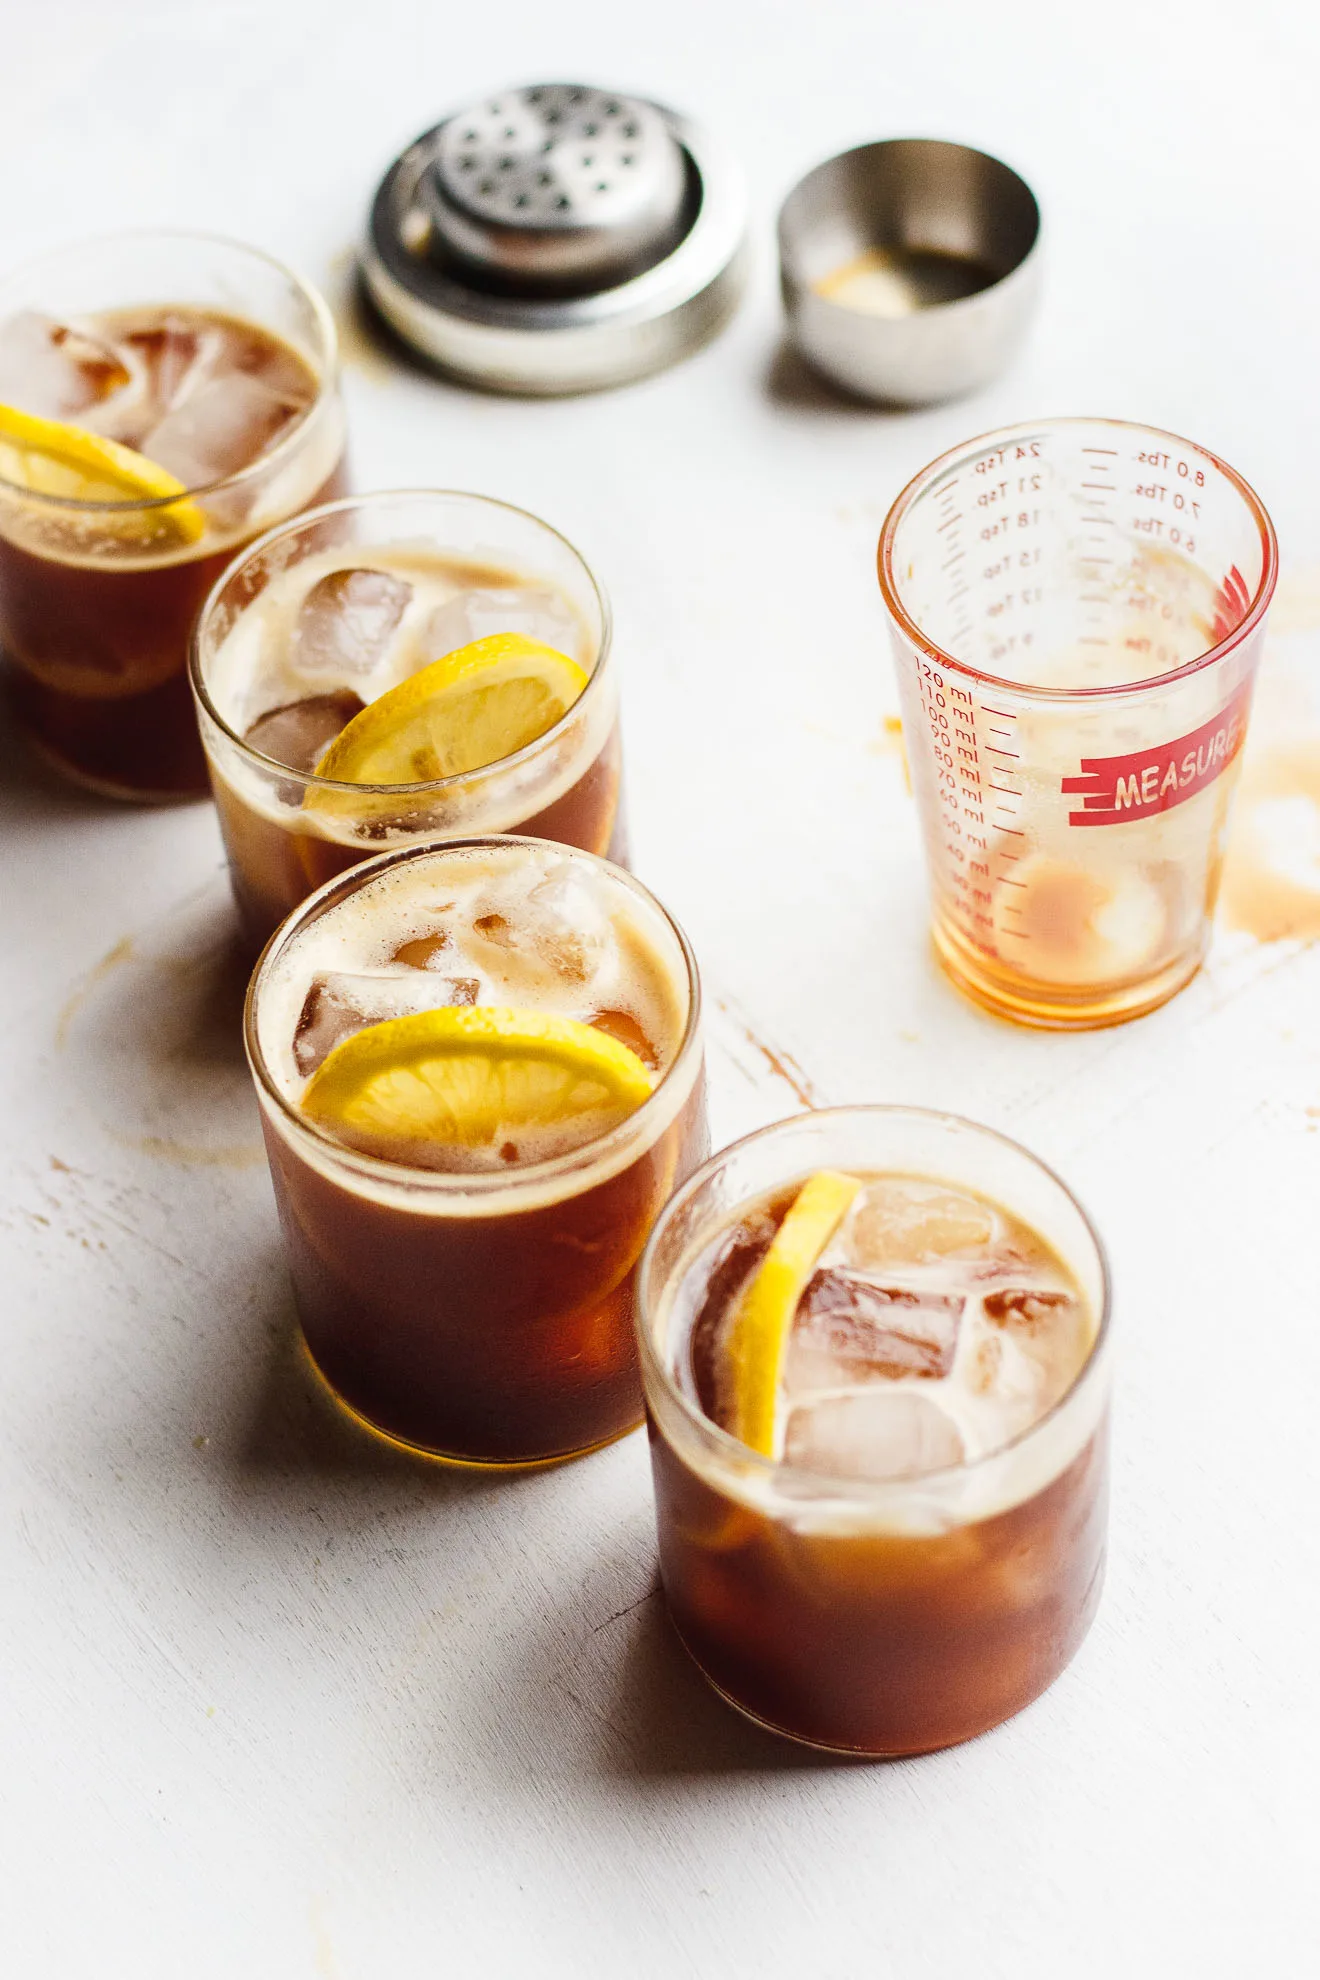 Naturally Sweetened Iced Coffee Lemonade | Iced coffee lemonade naturally sweetened with lemon juice and stevia is a natural combination. Iced coffee lemonade is refreshing and delicious.